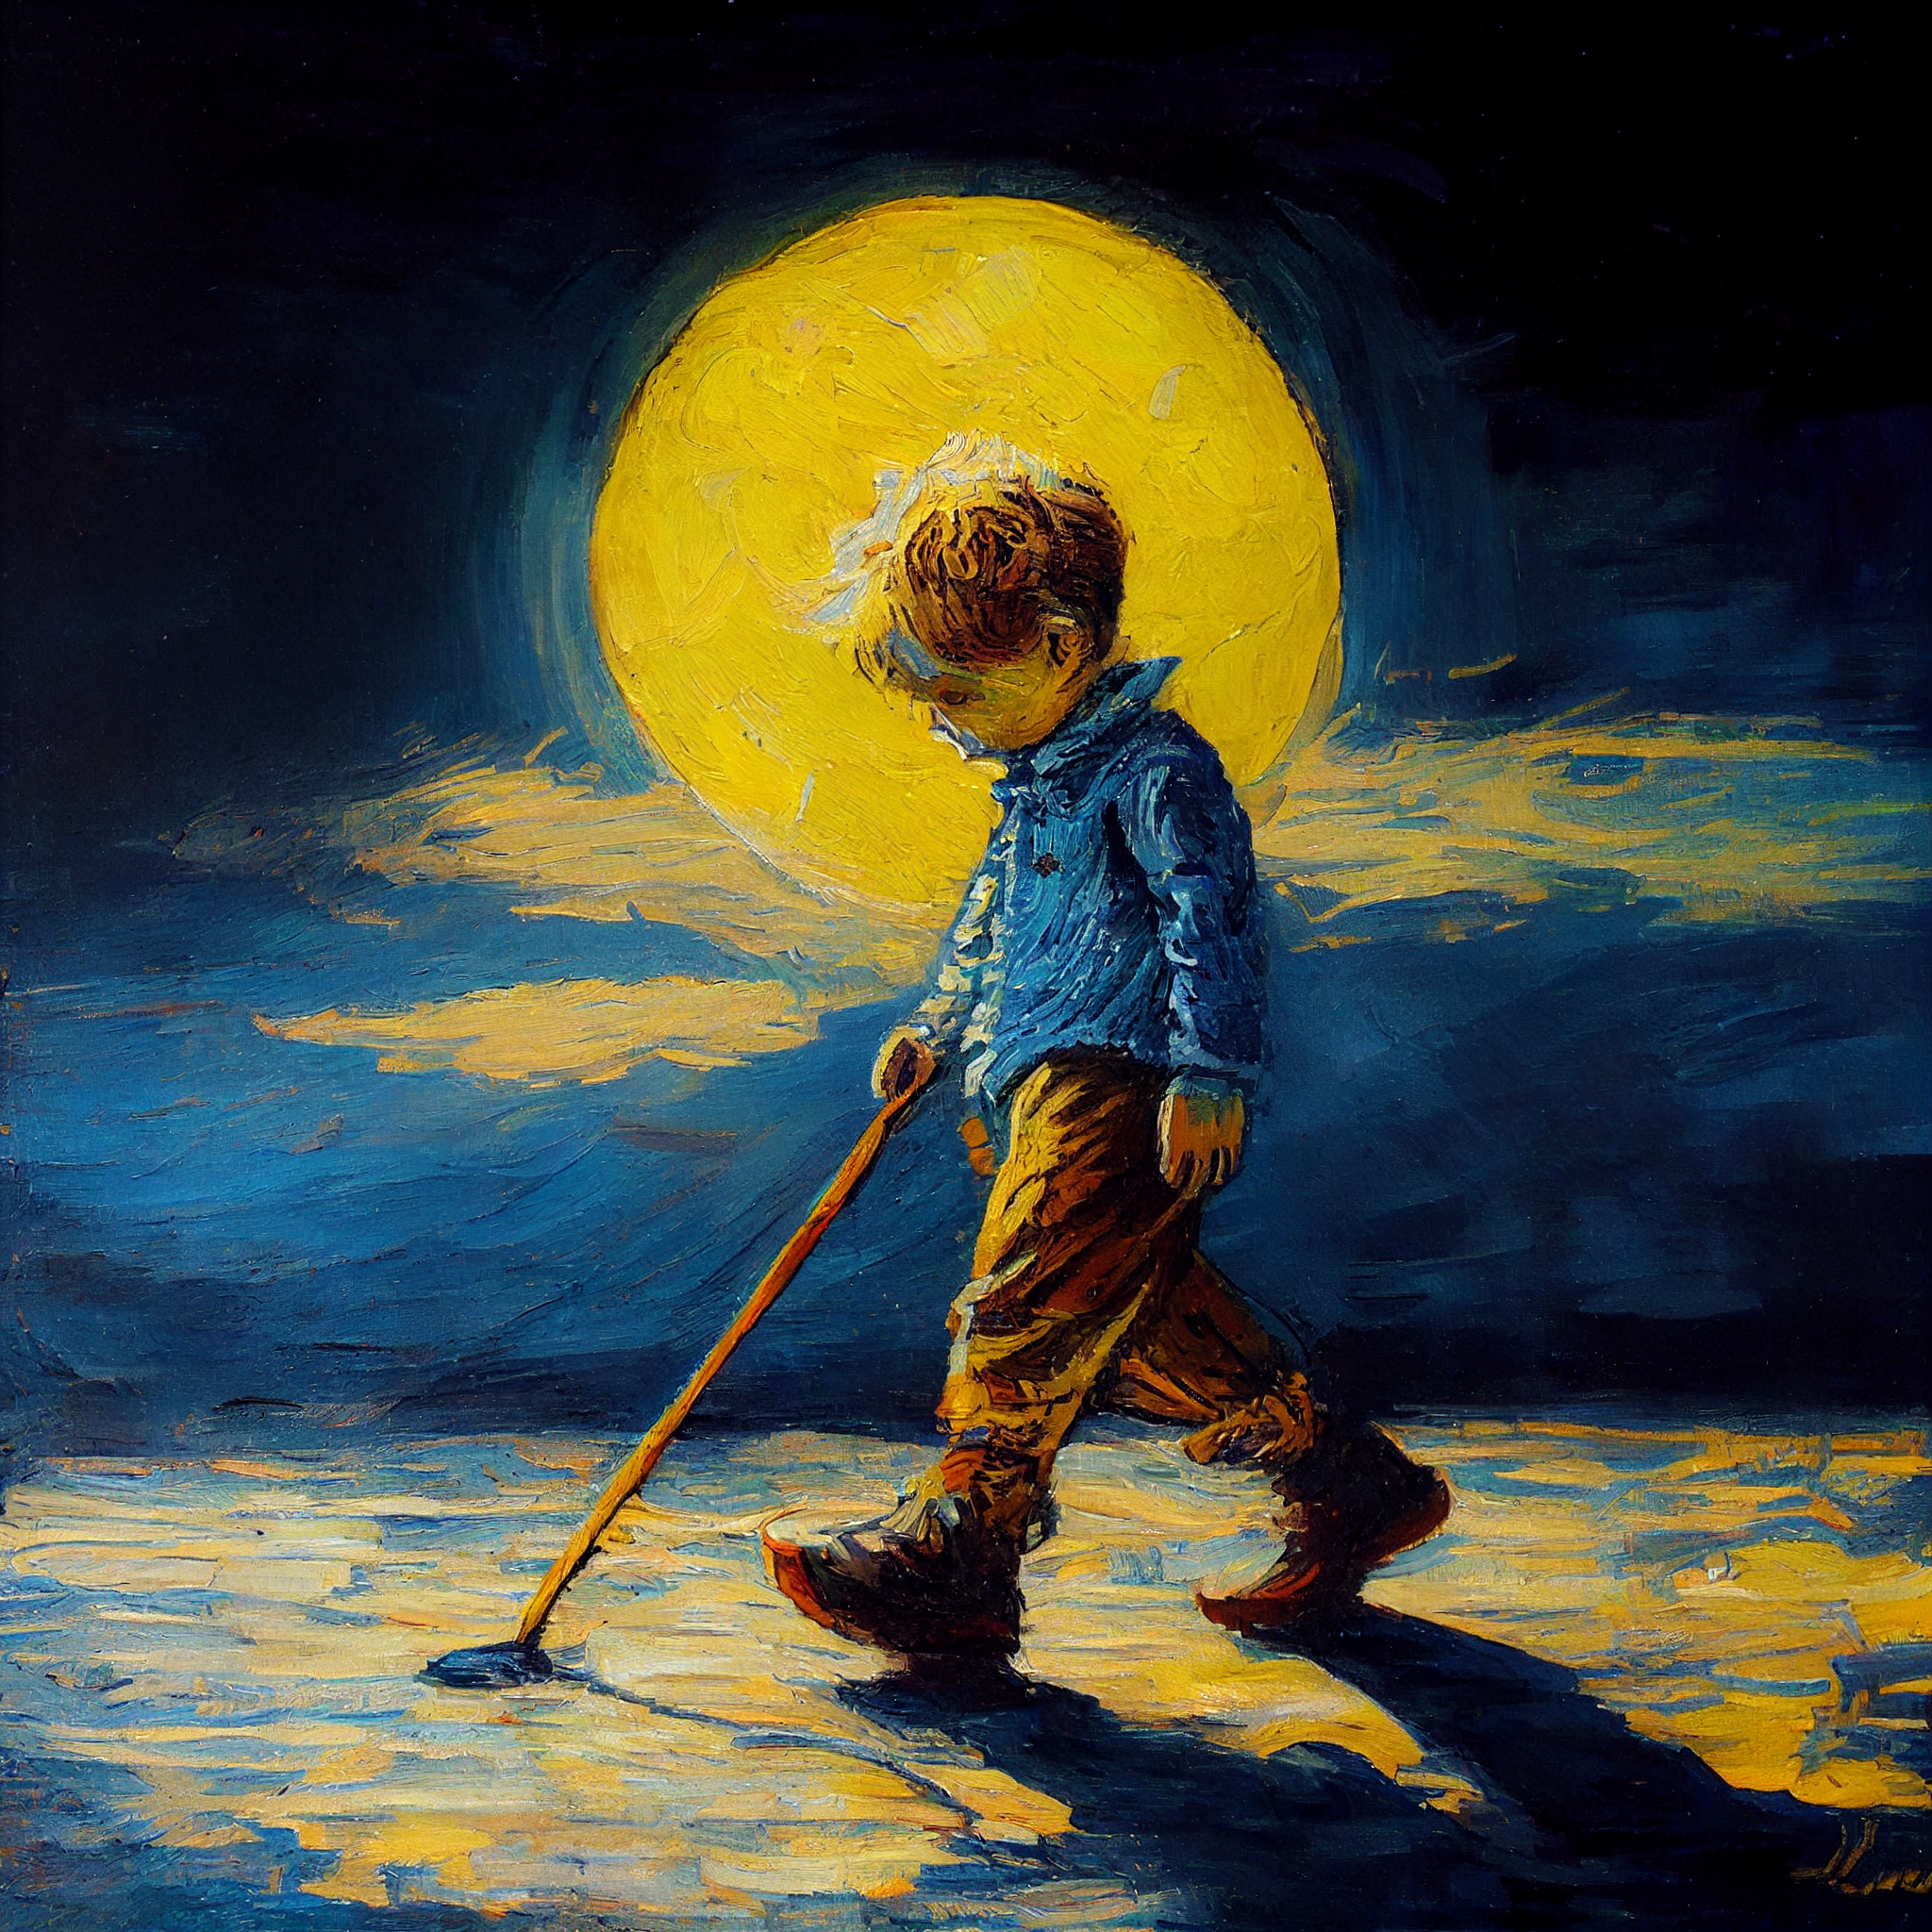 Radiant Reflections: A Stunning Oil Painting Print of a Boy Walking under the Moonlight